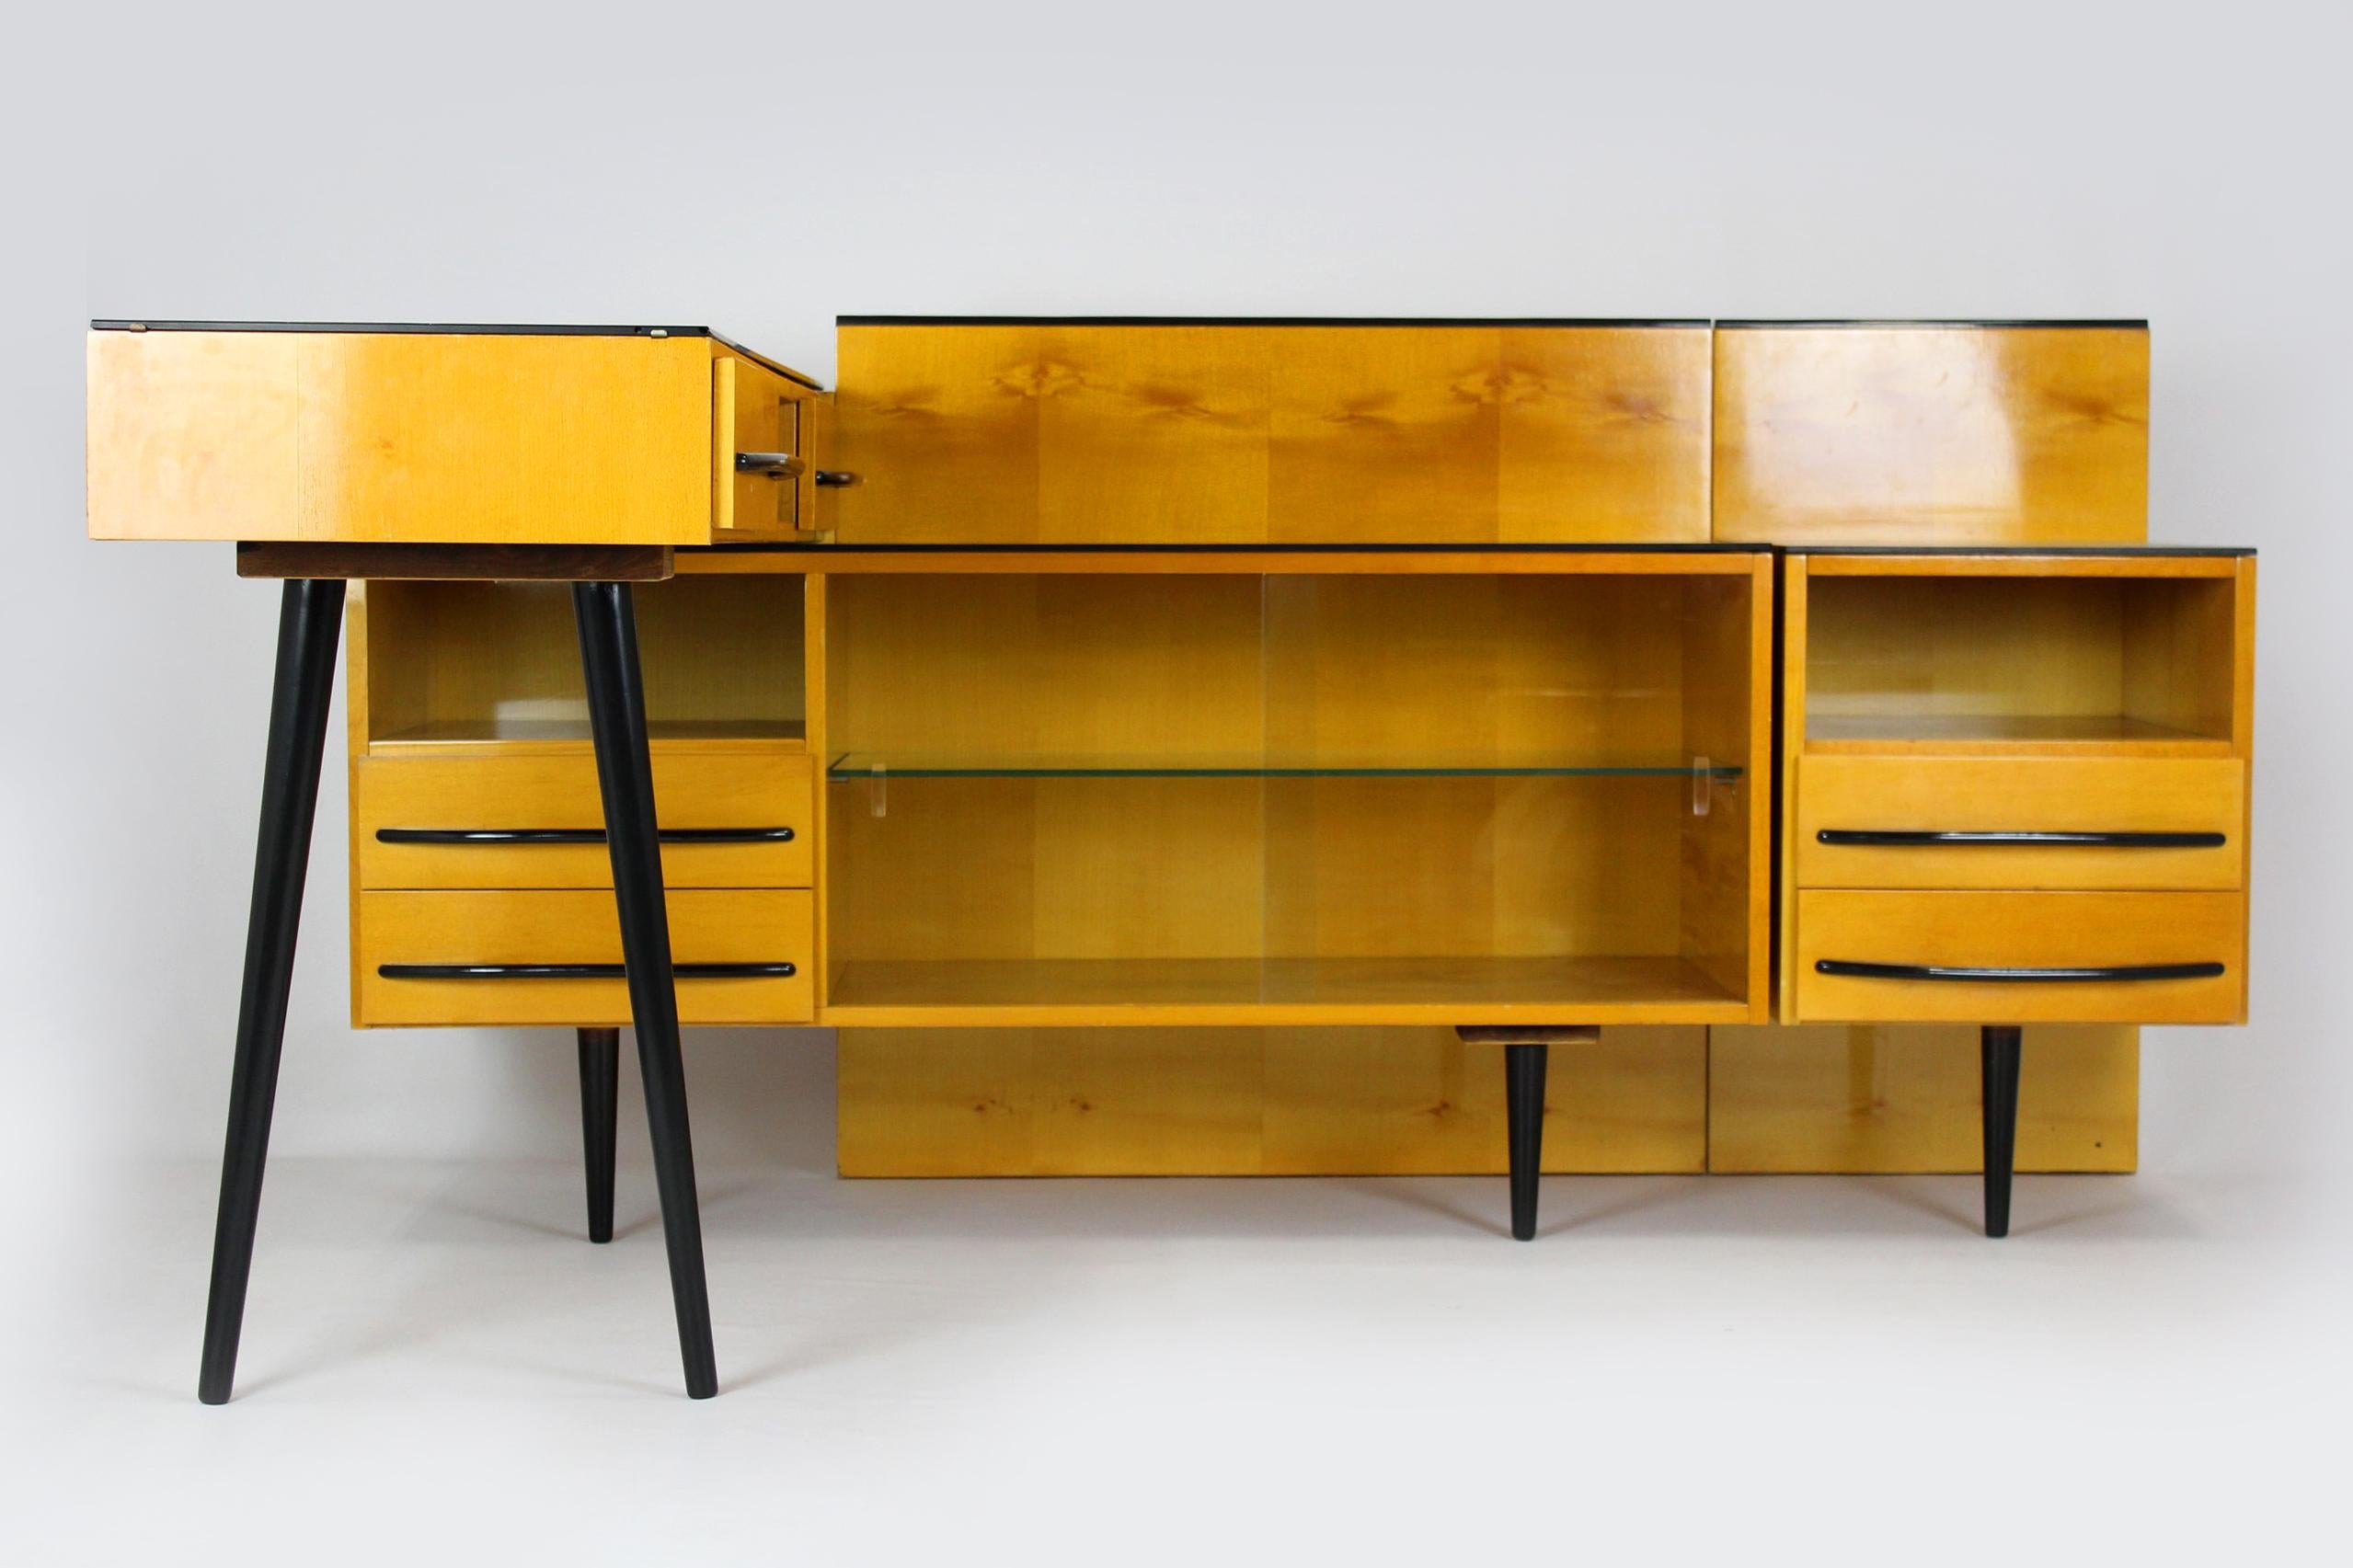 This vintage furniture set was designed by Mojmir Pozar and produced in the 1960s in the Czech Republic.
The set consists of three elements:
- smaller cabinet: 40x42x60cm
- larger cabinet: 120x42x60cm
- desk: 120x40x75cm
They can be combined in